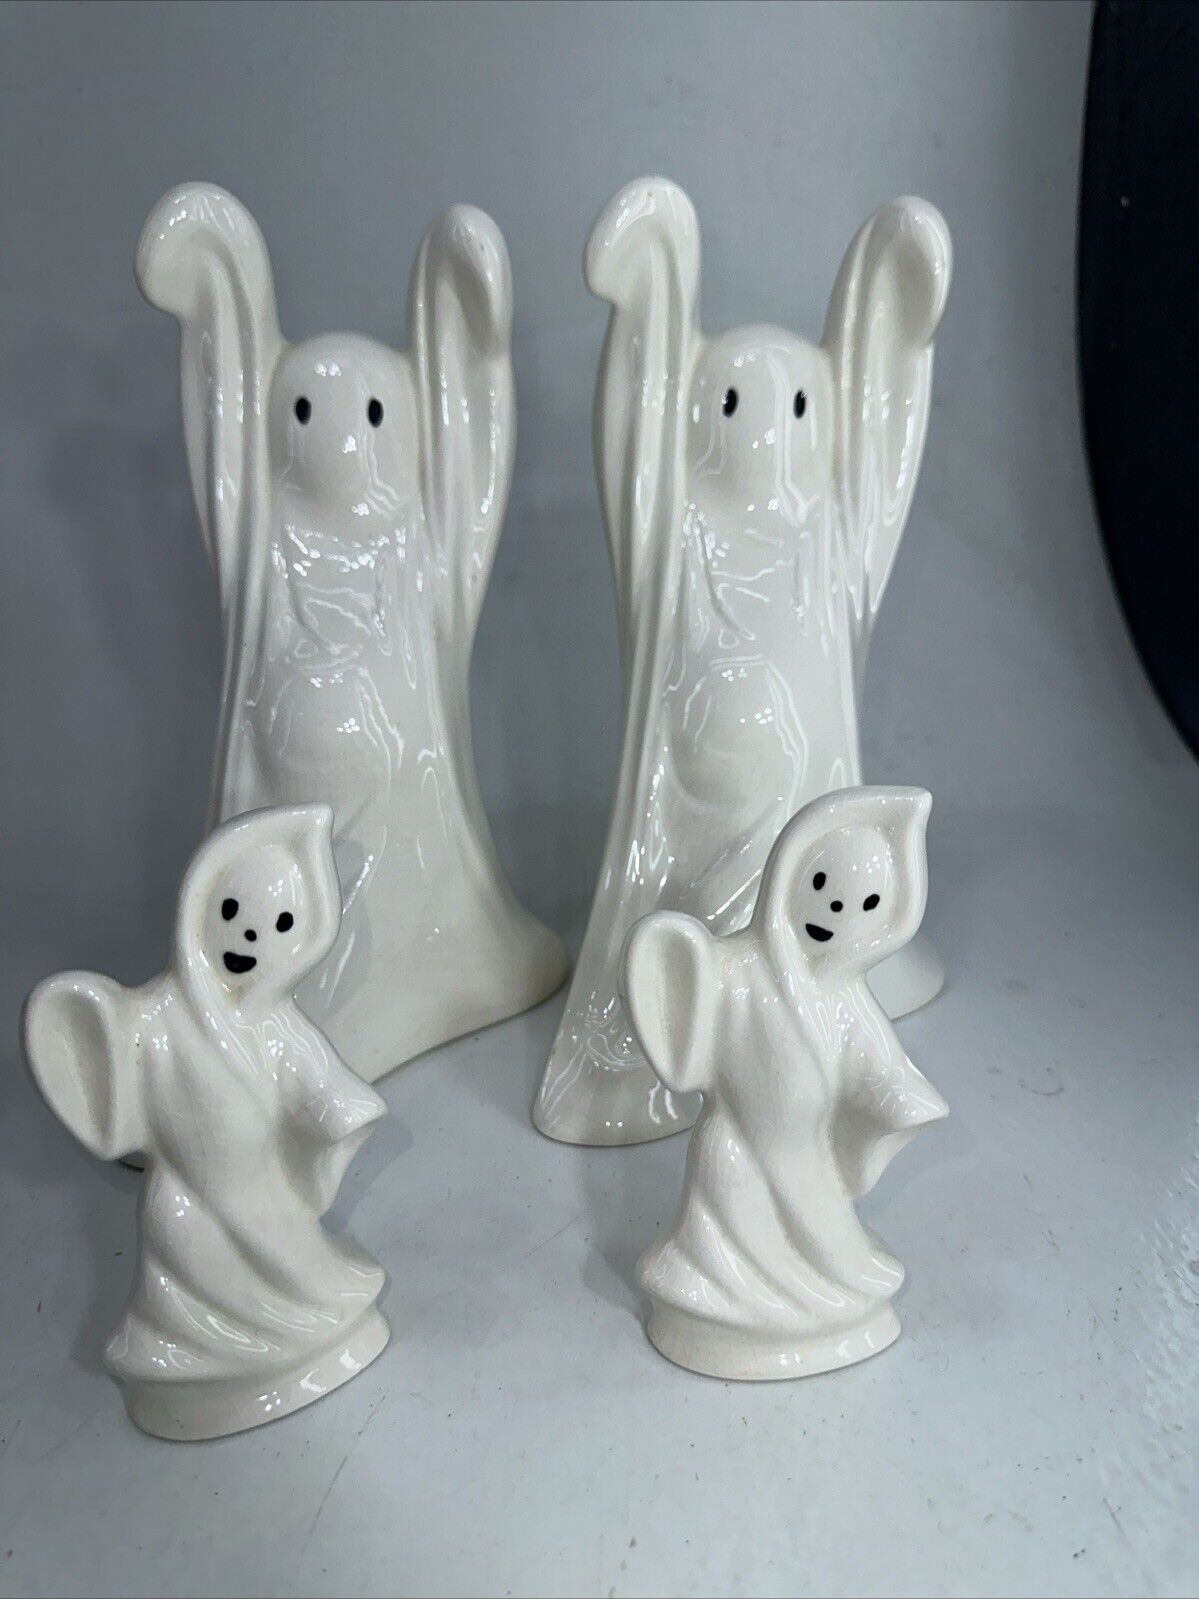 Lot Of 4 Vintage Ceramic Dancing Ghost Statue Decor Halloween 10” & 5” Tall